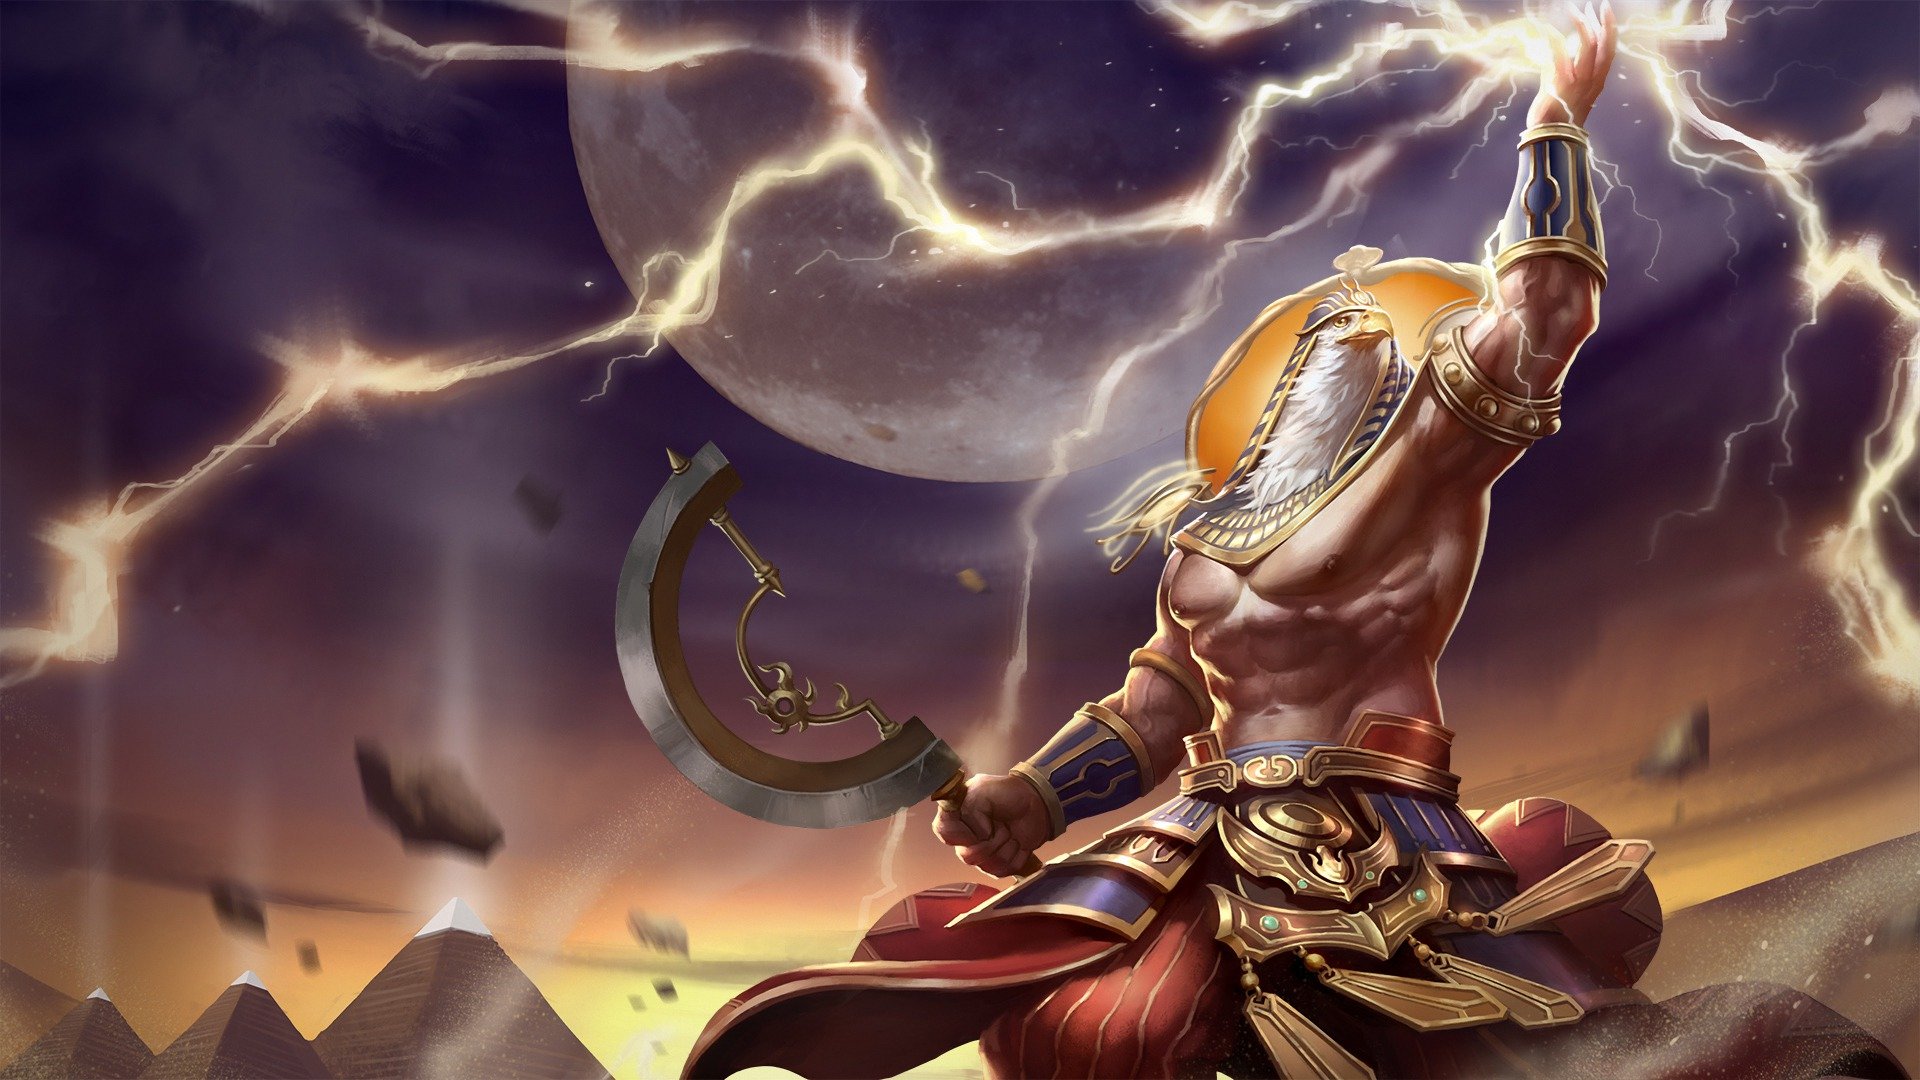 Awesome Heroes Of Newerth free wallpaper ID:186120 for full hd 1080p computer